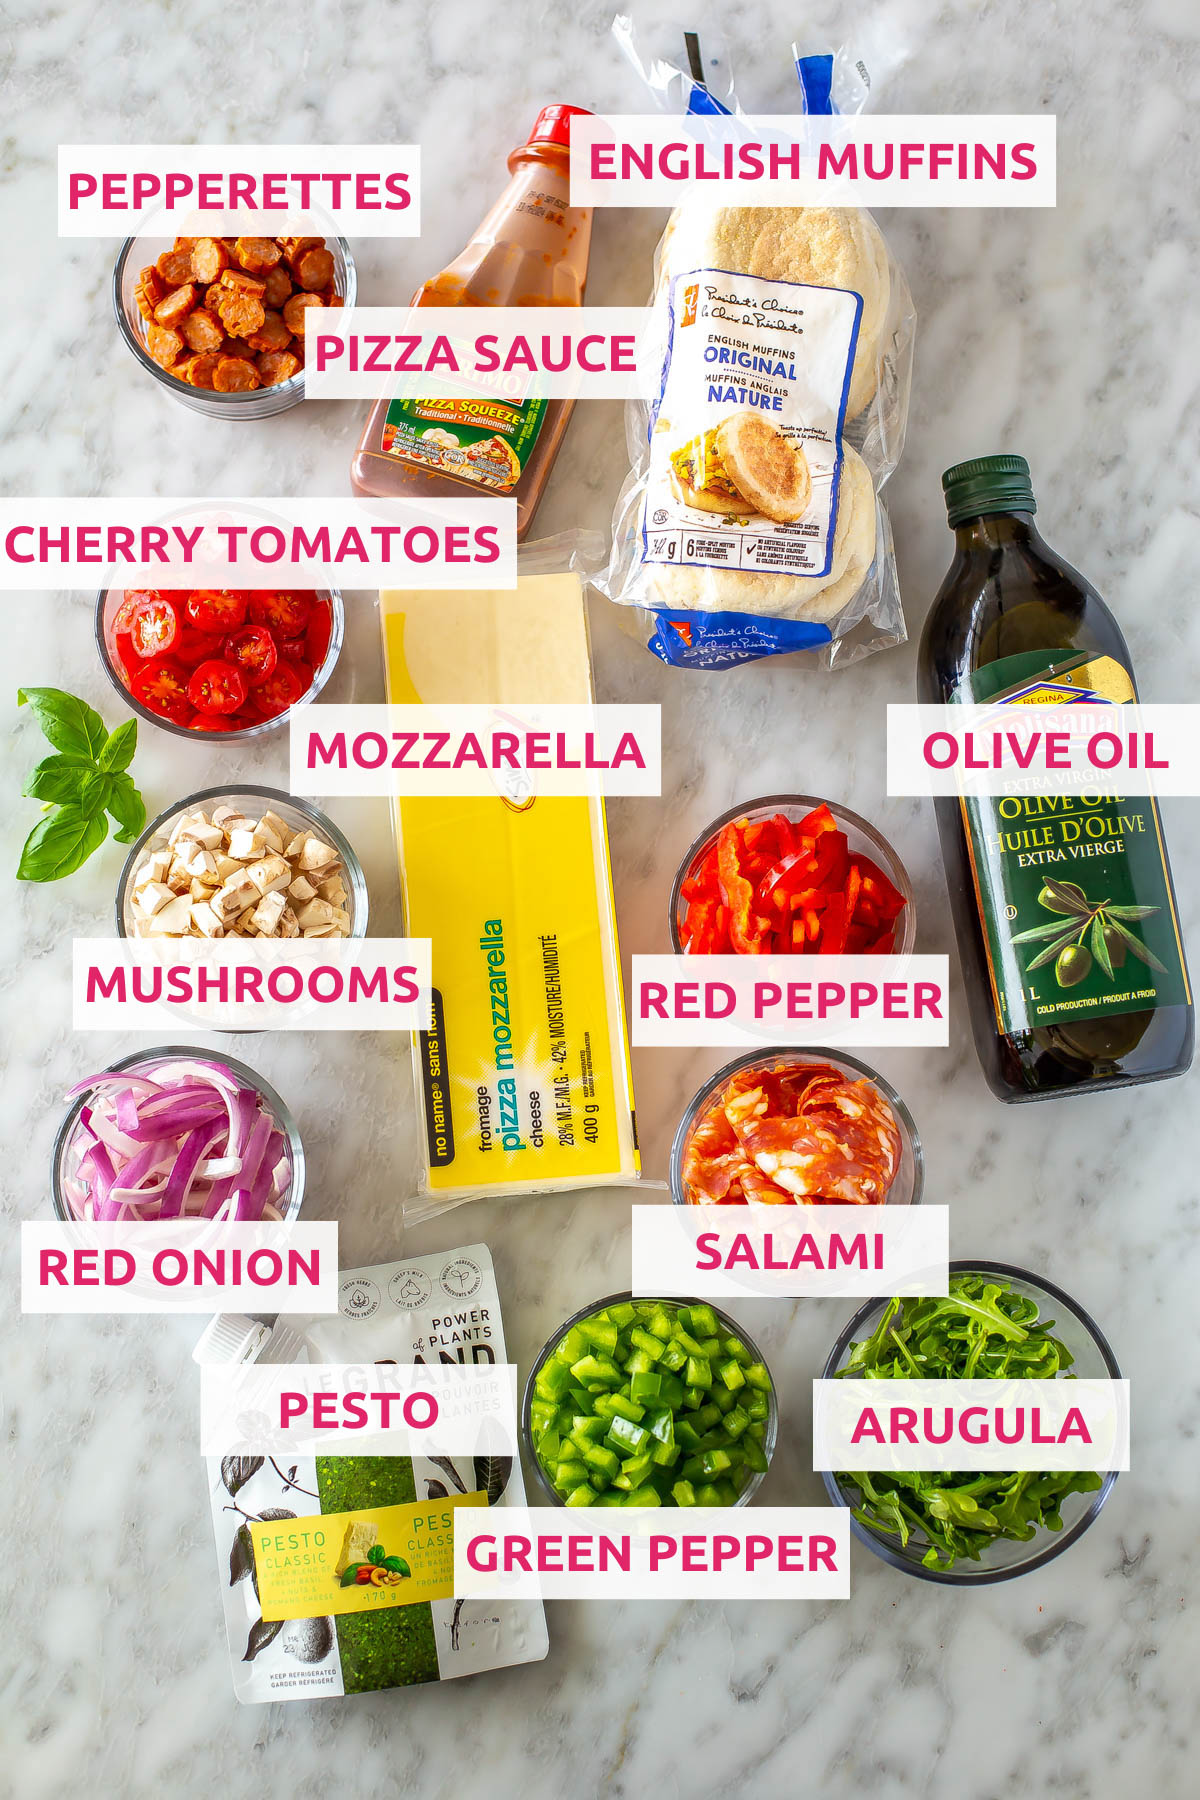 Ingredients for english muffin pizzas: english muffins, pizza sauce, mozzarella cheese, pepperettes, olive oil, cherry tomatoes, mushrooms, red pepper, red onion, salami, pesto, green pepper and arugula.